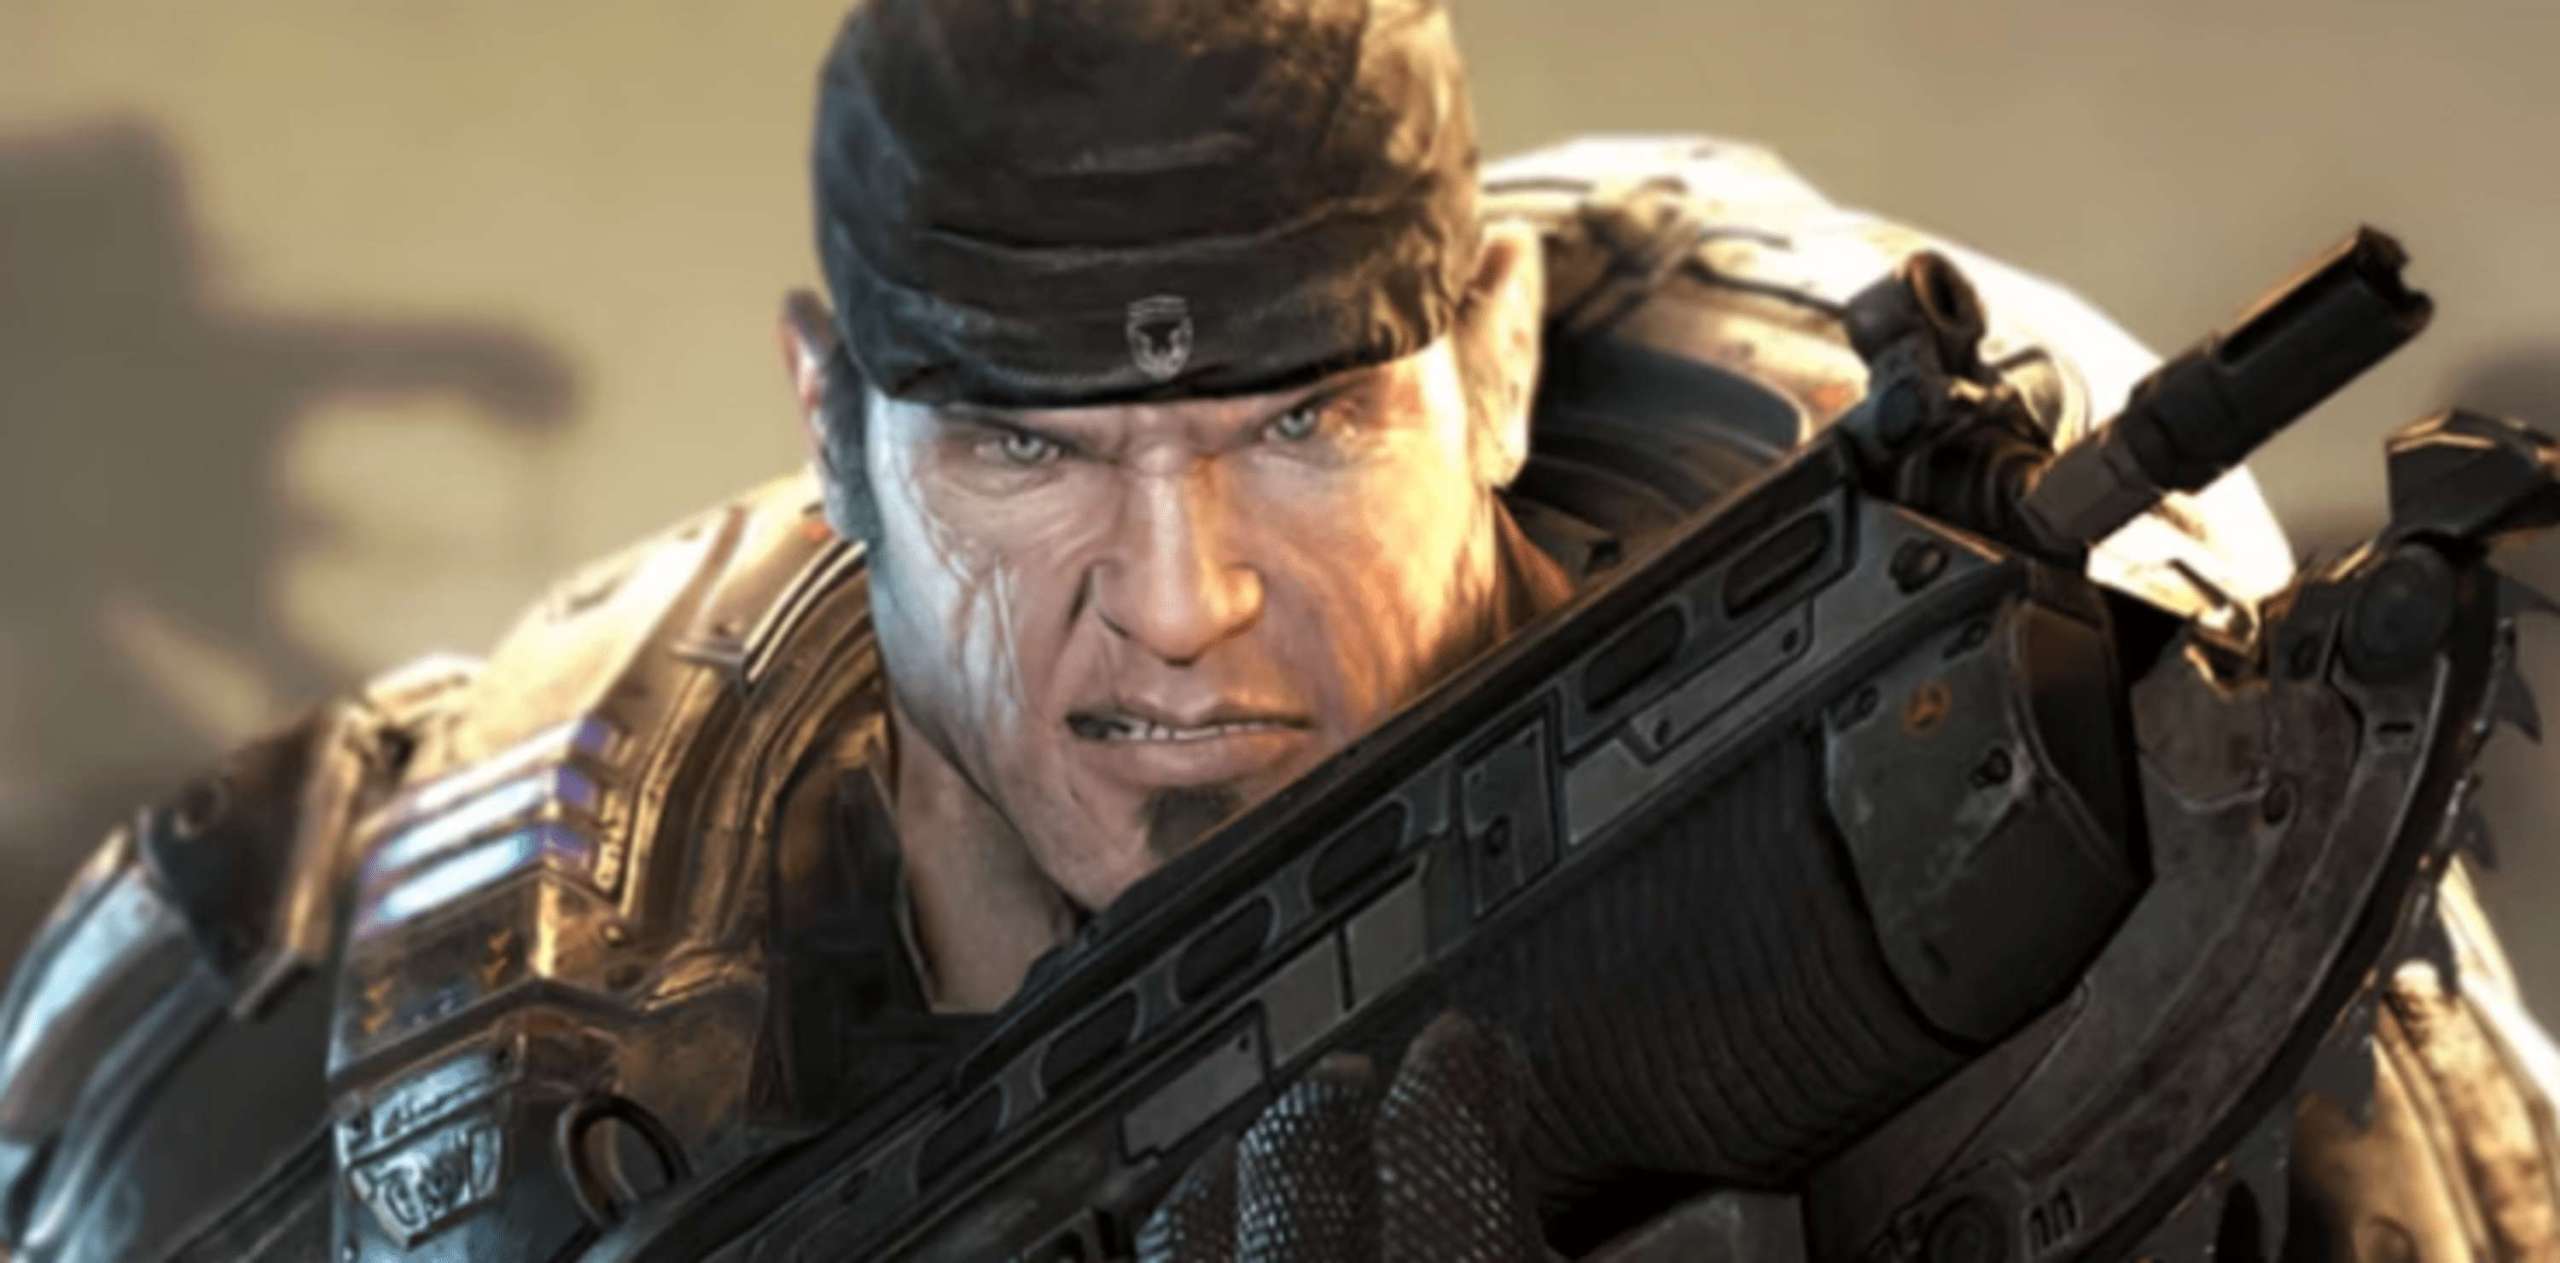 The Man Who Made Gears Of War Claims That Epic Games Sold The Franchise Because It Was At A Loss On What To Do With It